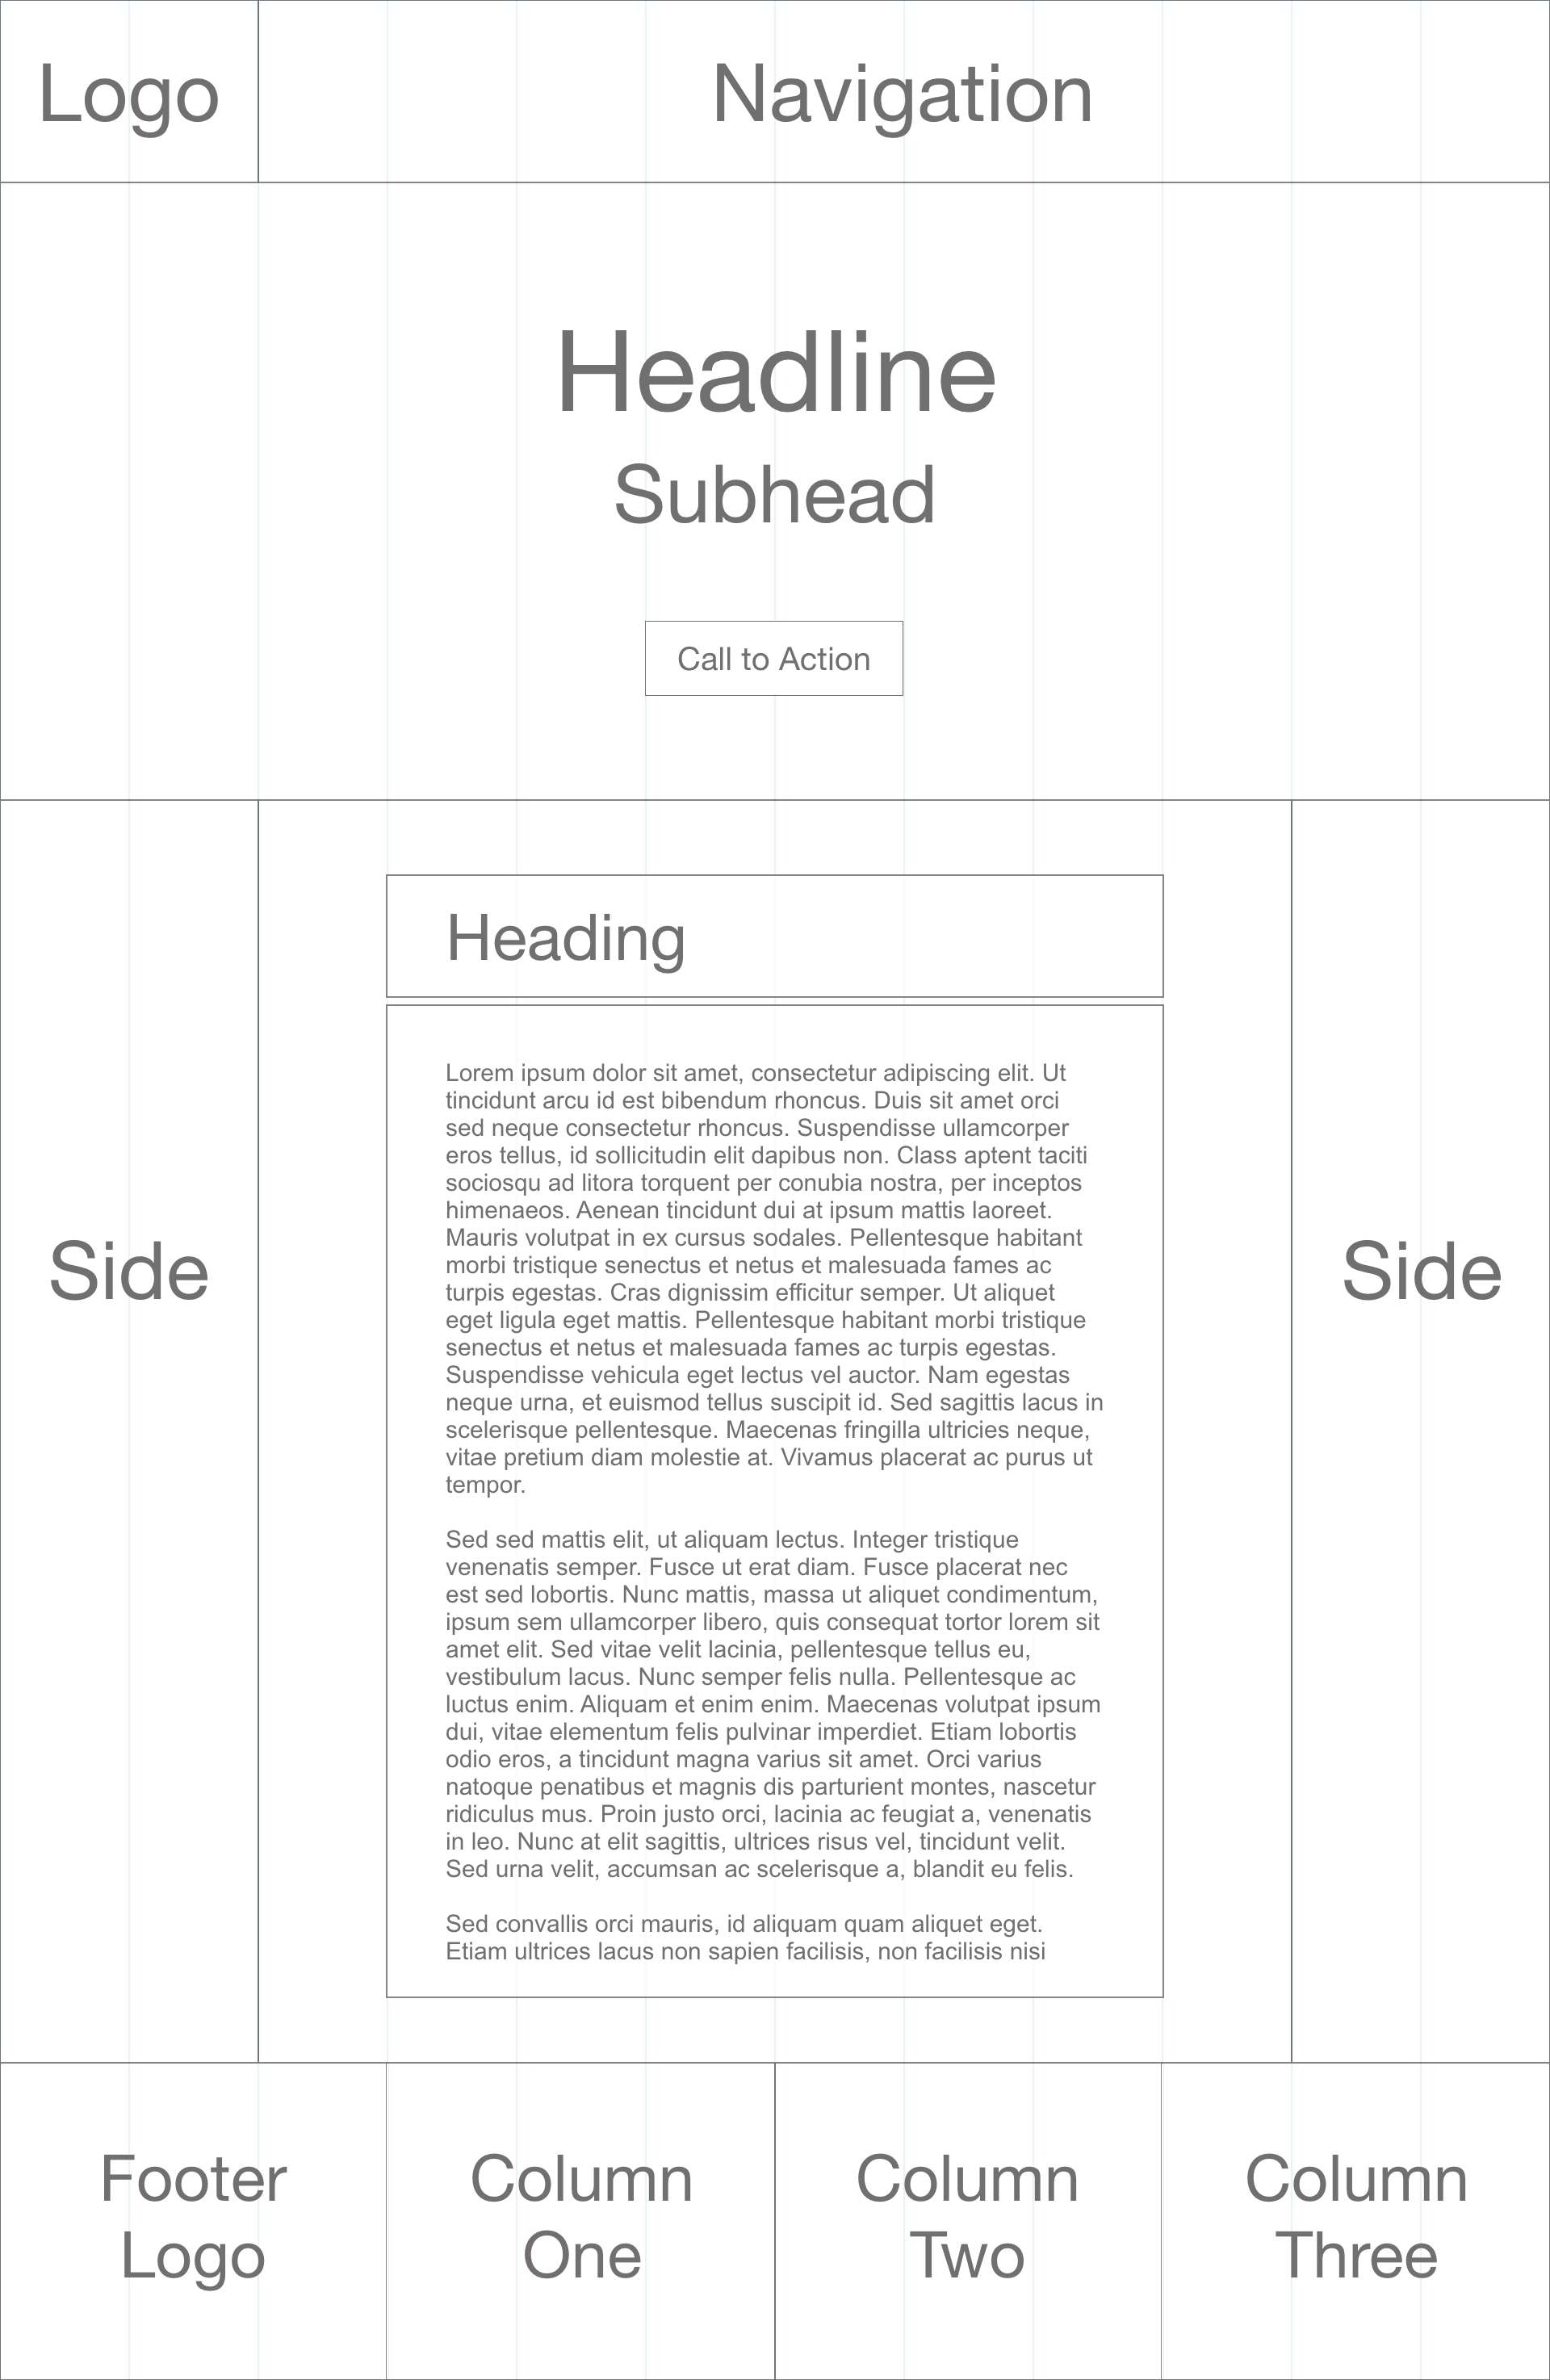 Before CSS Grid, layouts are symmetrical and static.